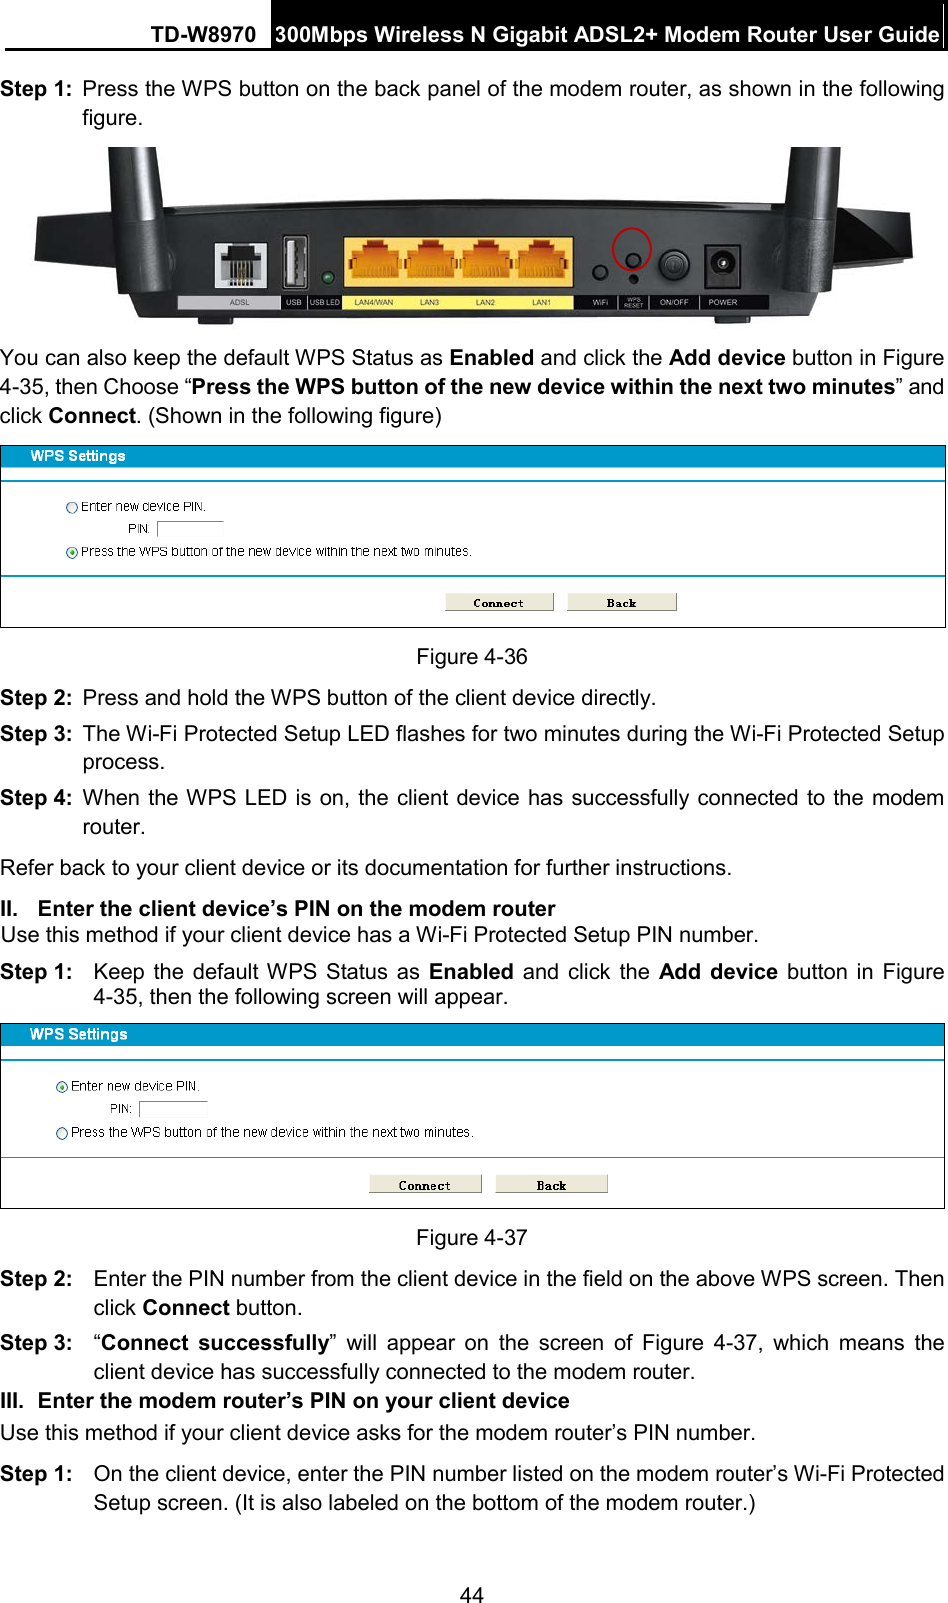 TD-W8970 300Mbps Wireless N Gigabit ADSL2+ Modem Router User Guide  Step 1: Press the WPS button on the back panel of the modem router, as shown in the following figure.  You can also keep the default WPS Status as Enabled and click the Add device button in Figure 4-35, then Choose “Press the WPS button of the new device within the next two minutes” and click Connect. (Shown in the following figure)  Figure 4-36 Step 2: Press and hold the WPS button of the client device directly.   Step 3: The Wi-Fi Protected Setup LED flashes for two minutes during the Wi-Fi Protected Setup process.   Step 4: When the WPS LED is on, the client device has successfully connected to the modem router.   Refer back to your client device or its documentation for further instructions. II. Enter the client device’s PIN on the modem router Use this method if your client device has a Wi-Fi Protected Setup PIN number. Step 1: Keep the default WPS Status as Enabled and click the Add device button in Figure 4-35, then the following screen will appear.    Figure 4-37 Step 2: Enter the PIN number from the client device in the field on the above WPS screen. Then click Connect button. Step 3: “Connect successfully”  will appear on the screen of Figure  4-37, which means the client device has successfully connected to the modem router. III. Enter the modem router’s PIN on your client device Use this method if your client device asks for the modem router’s PIN number.   Step 1: On the client device, enter the PIN number listed on the modem router’s Wi-Fi Protected Setup screen. (It is also labeled on the bottom of the modem router.) 44 